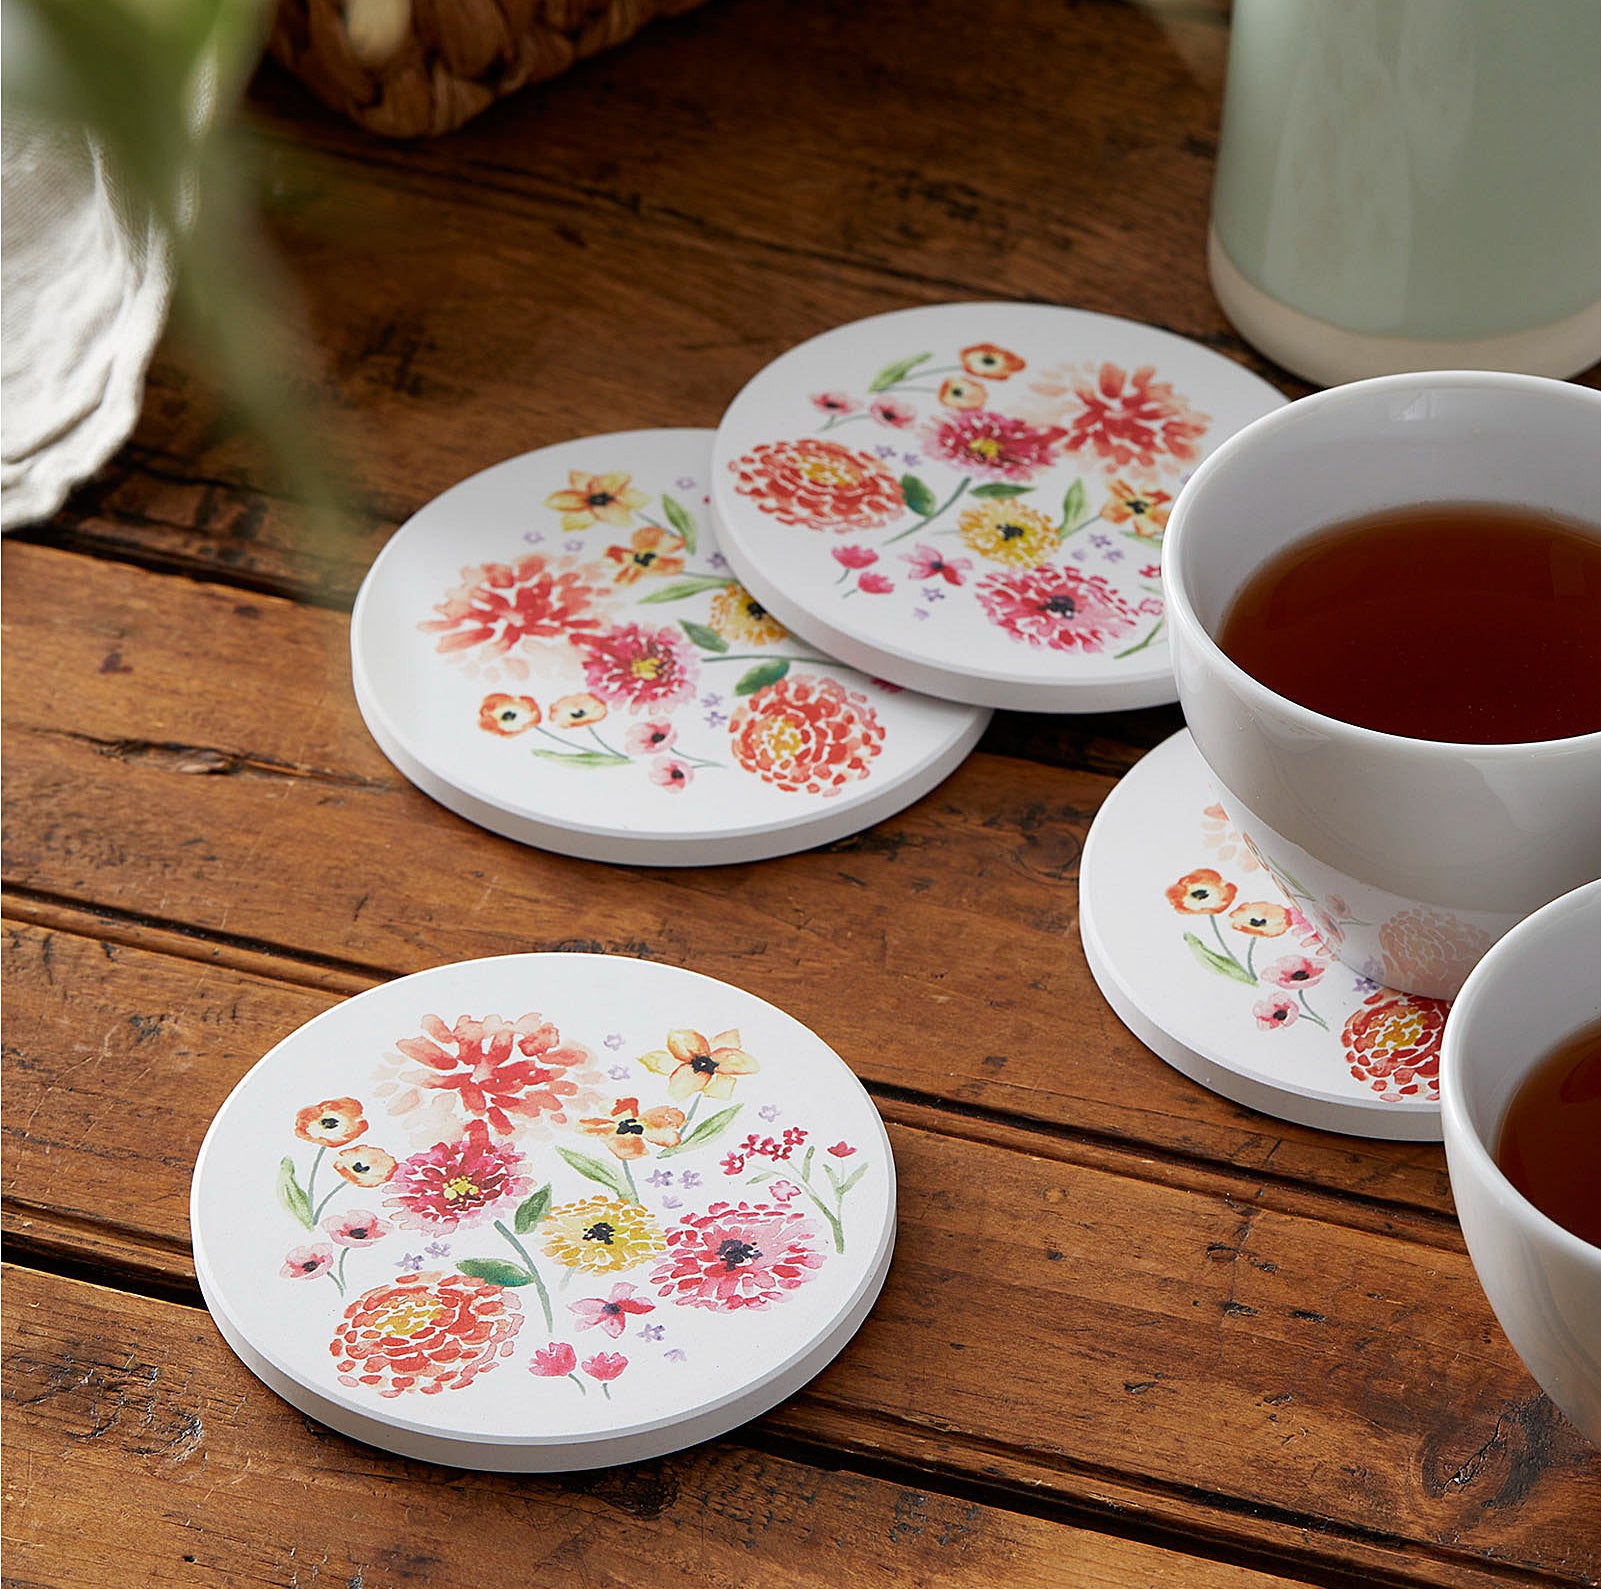 floral coasters on a wooden table next to cups of tea